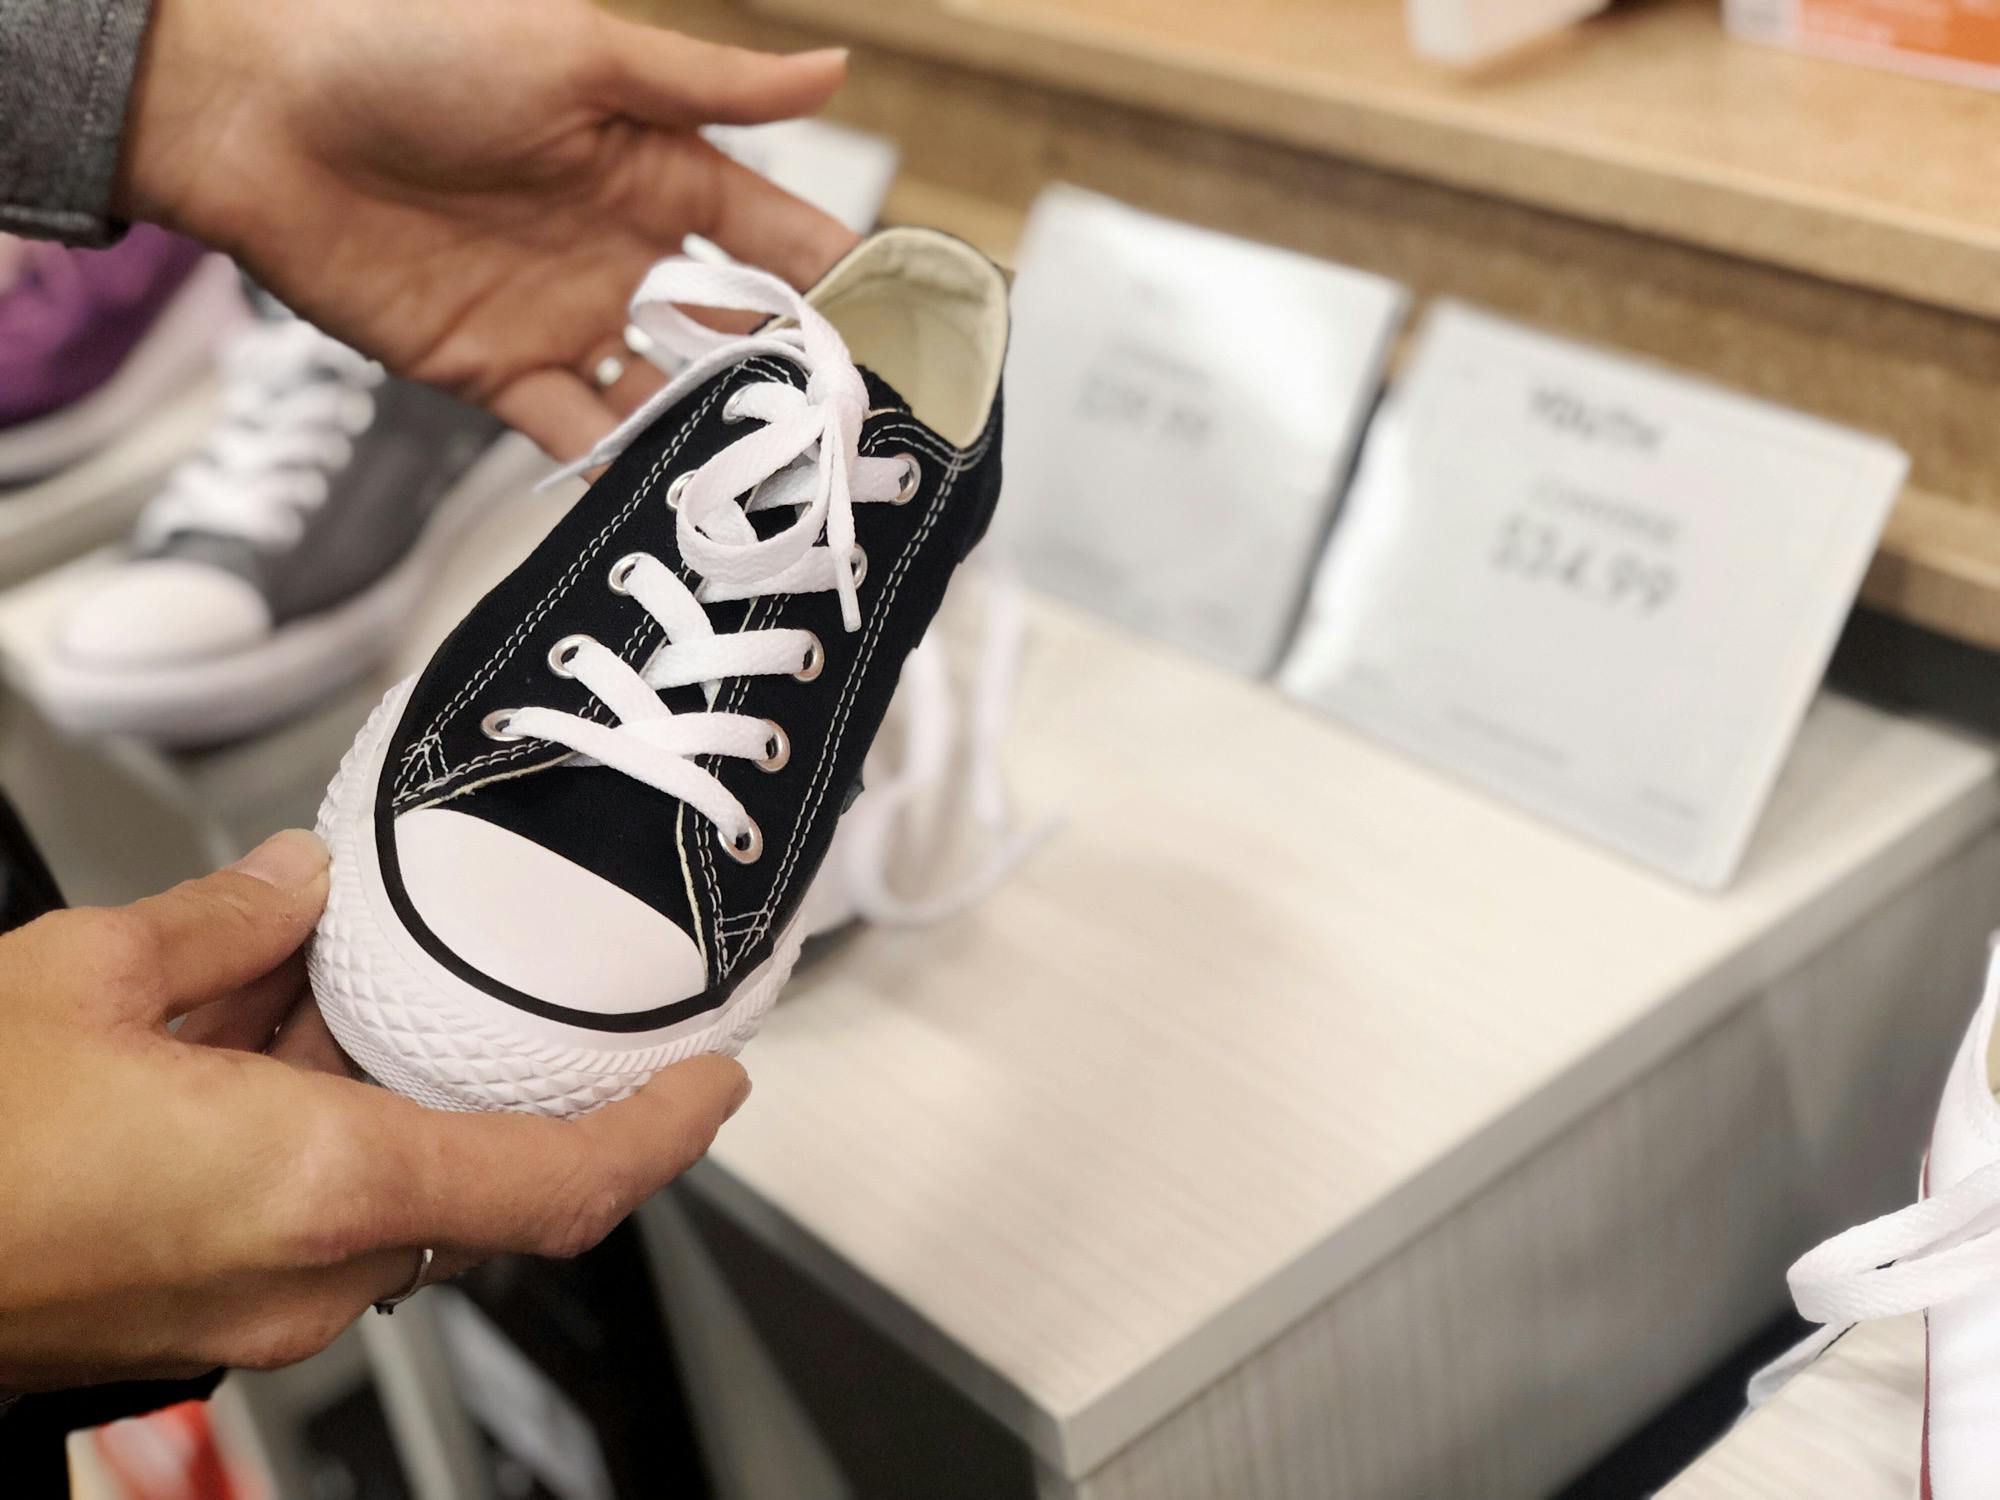 15 Converse Sales Tips Tricks To Get All The Deals - The Krazy Coupon Lady